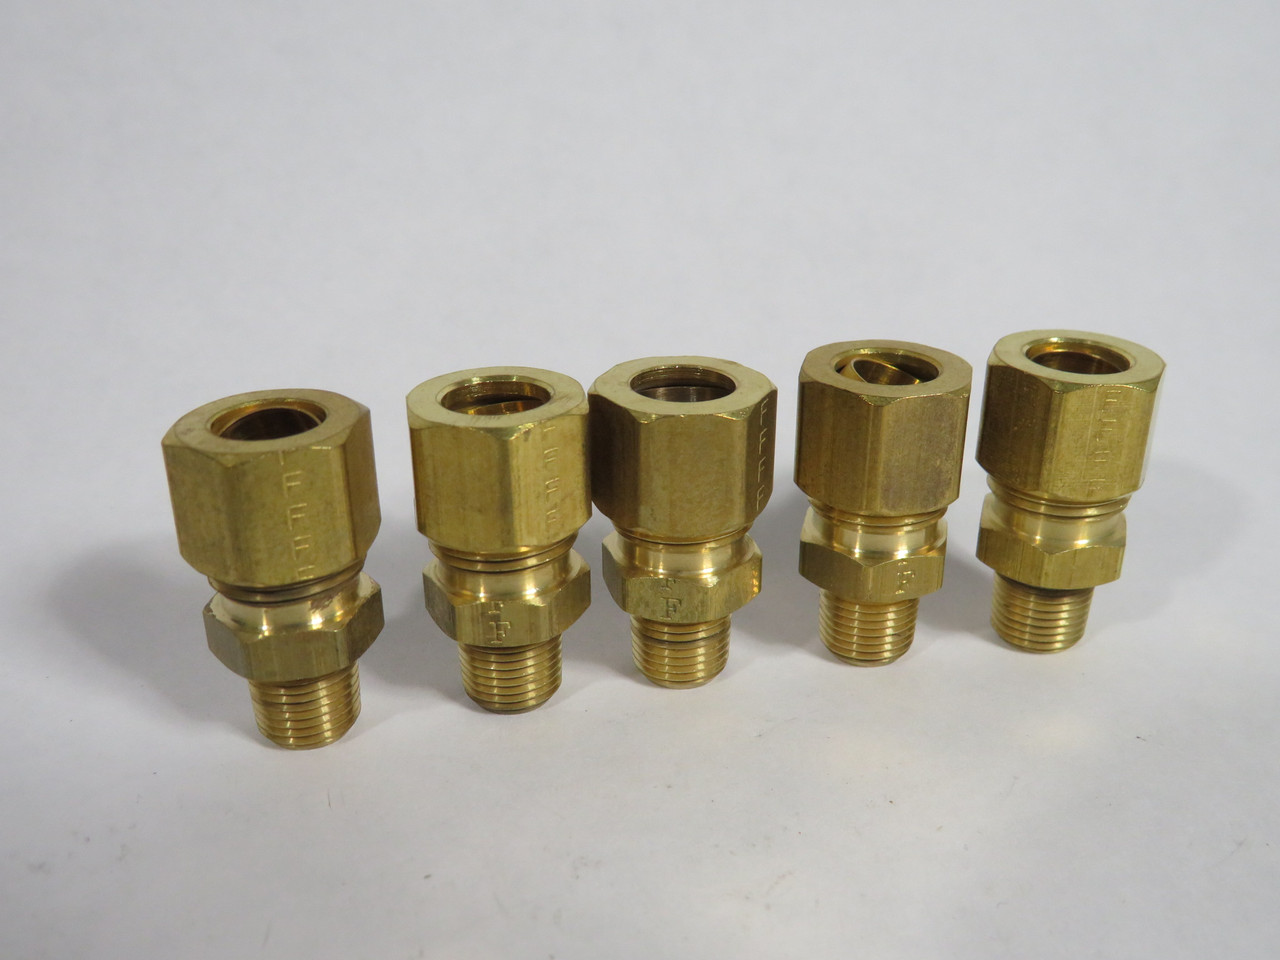 Fairview 68-6A Brass Compression Fitting 1/8" Male NPT 3/8" Tube Lot of 5 USED